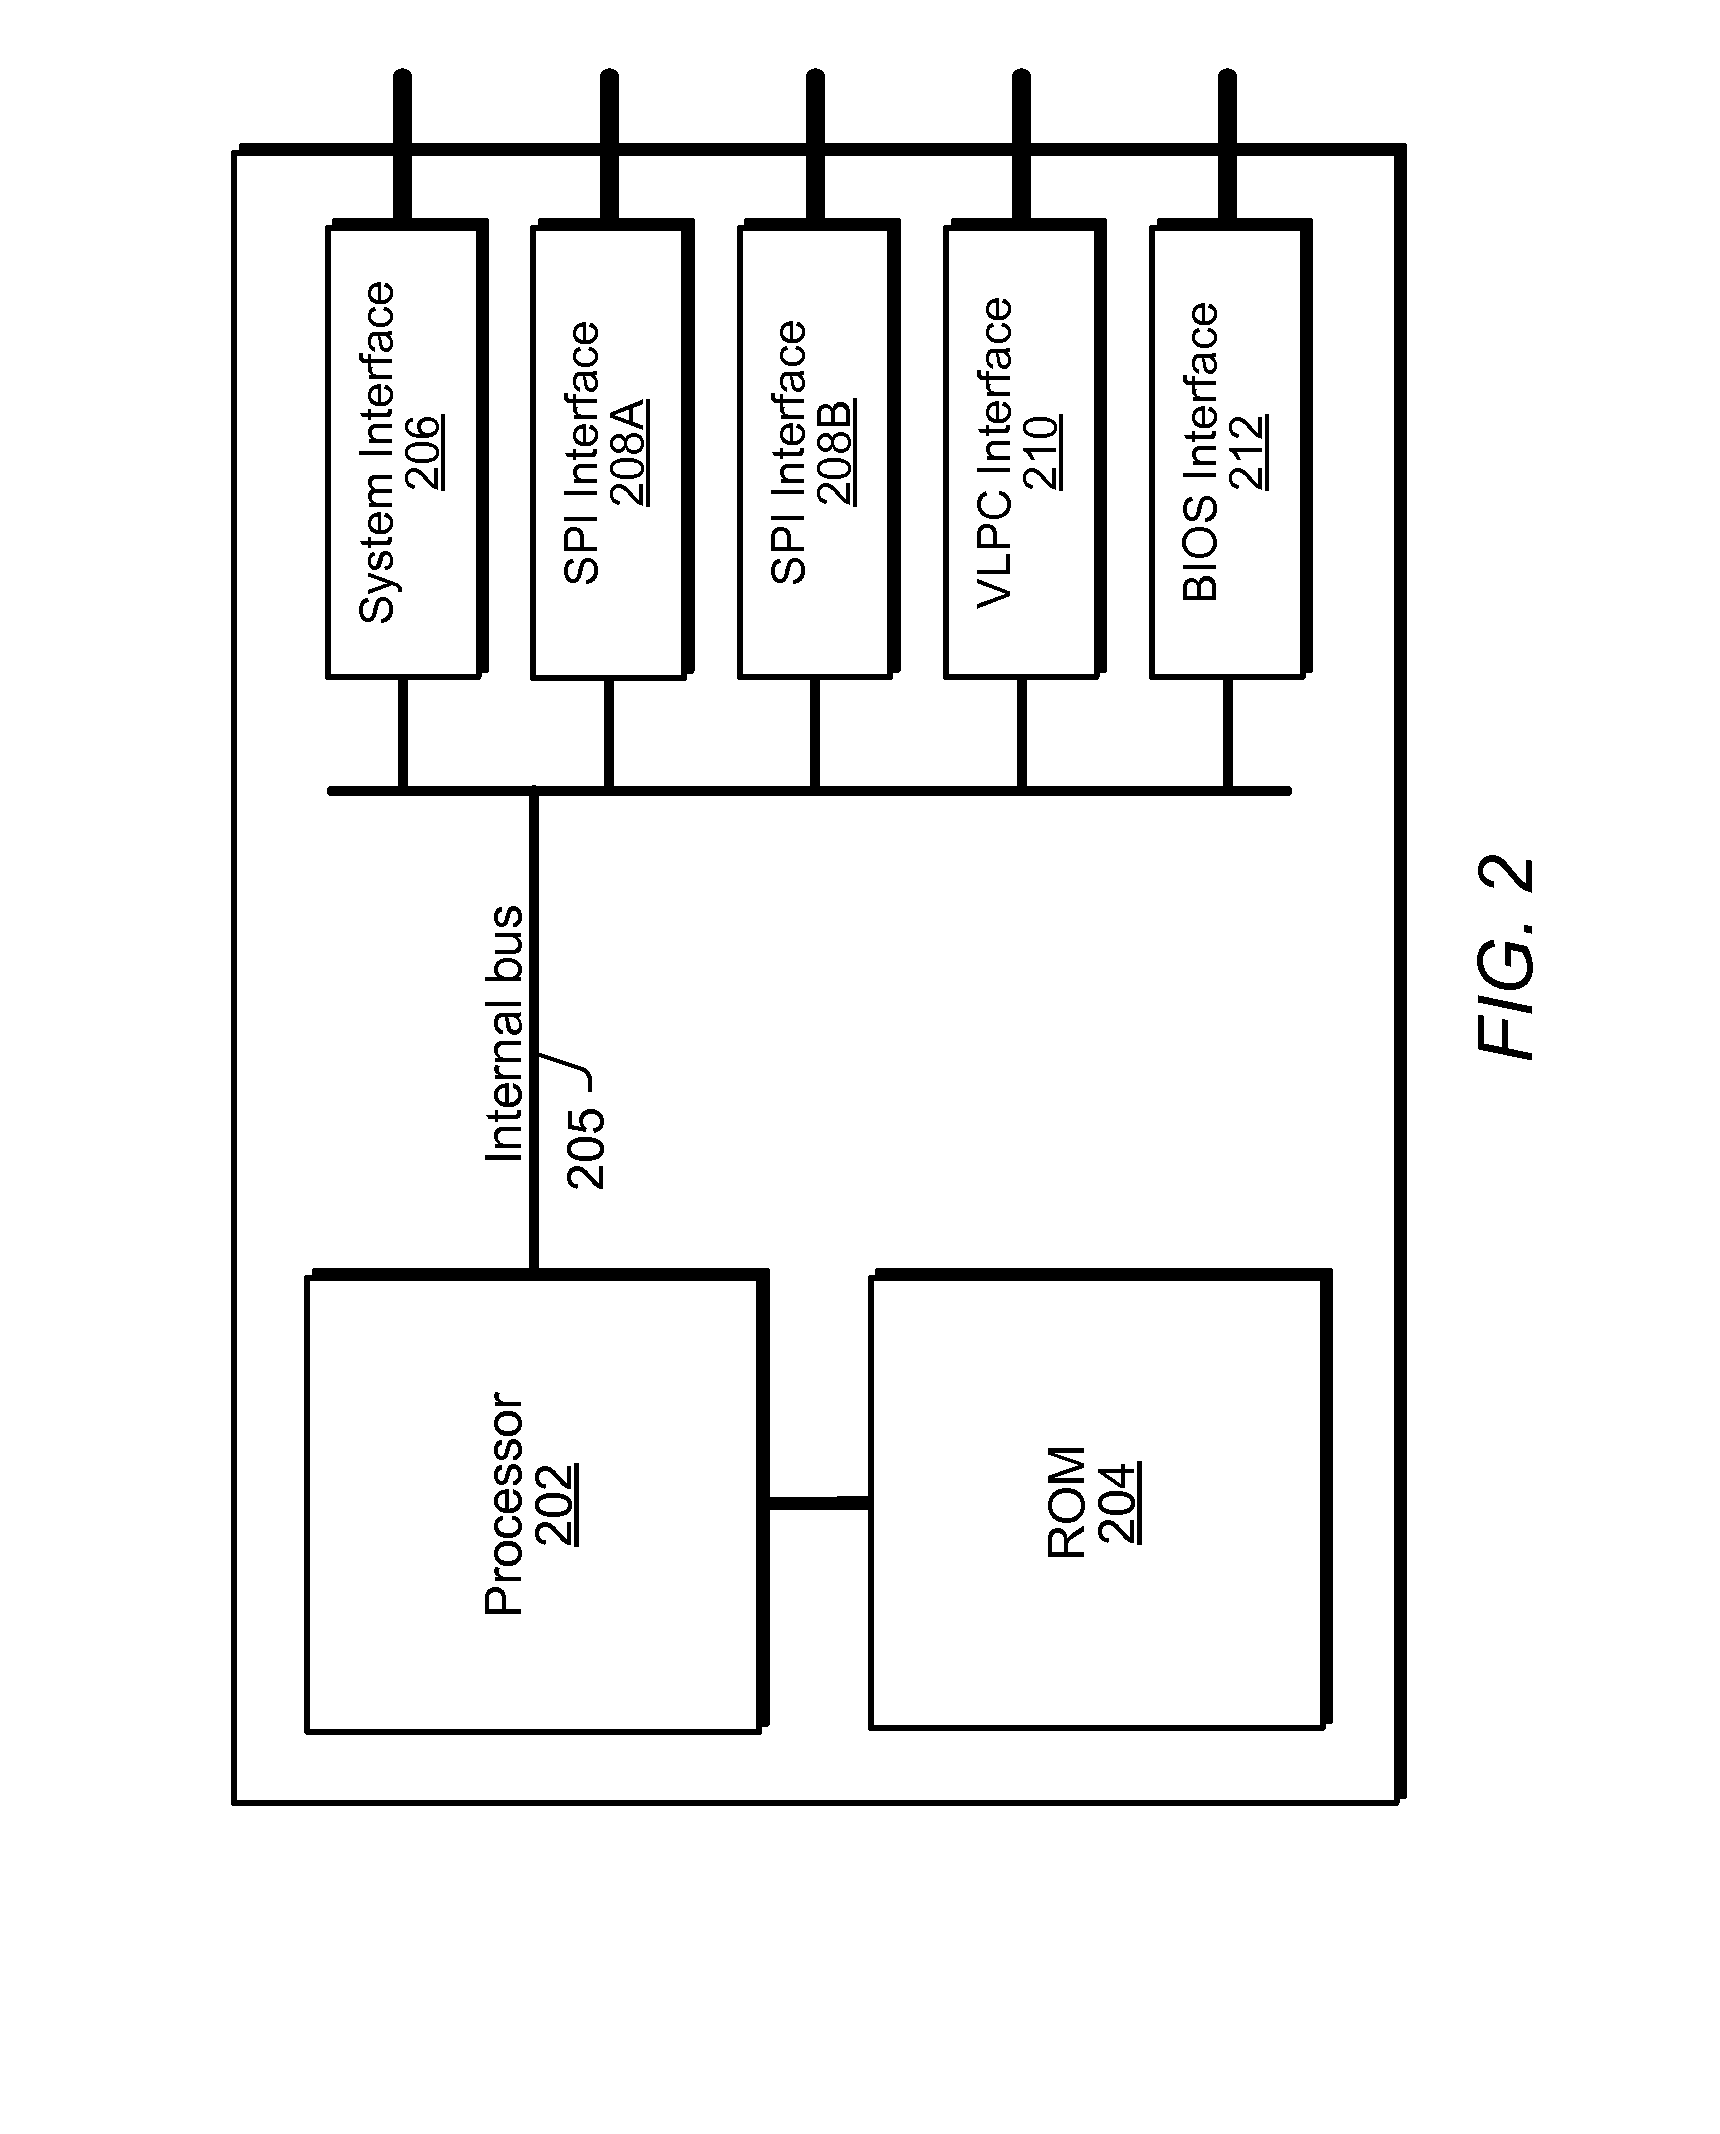 Enhancing security of a system via access by an embedded controller to a secure storage device